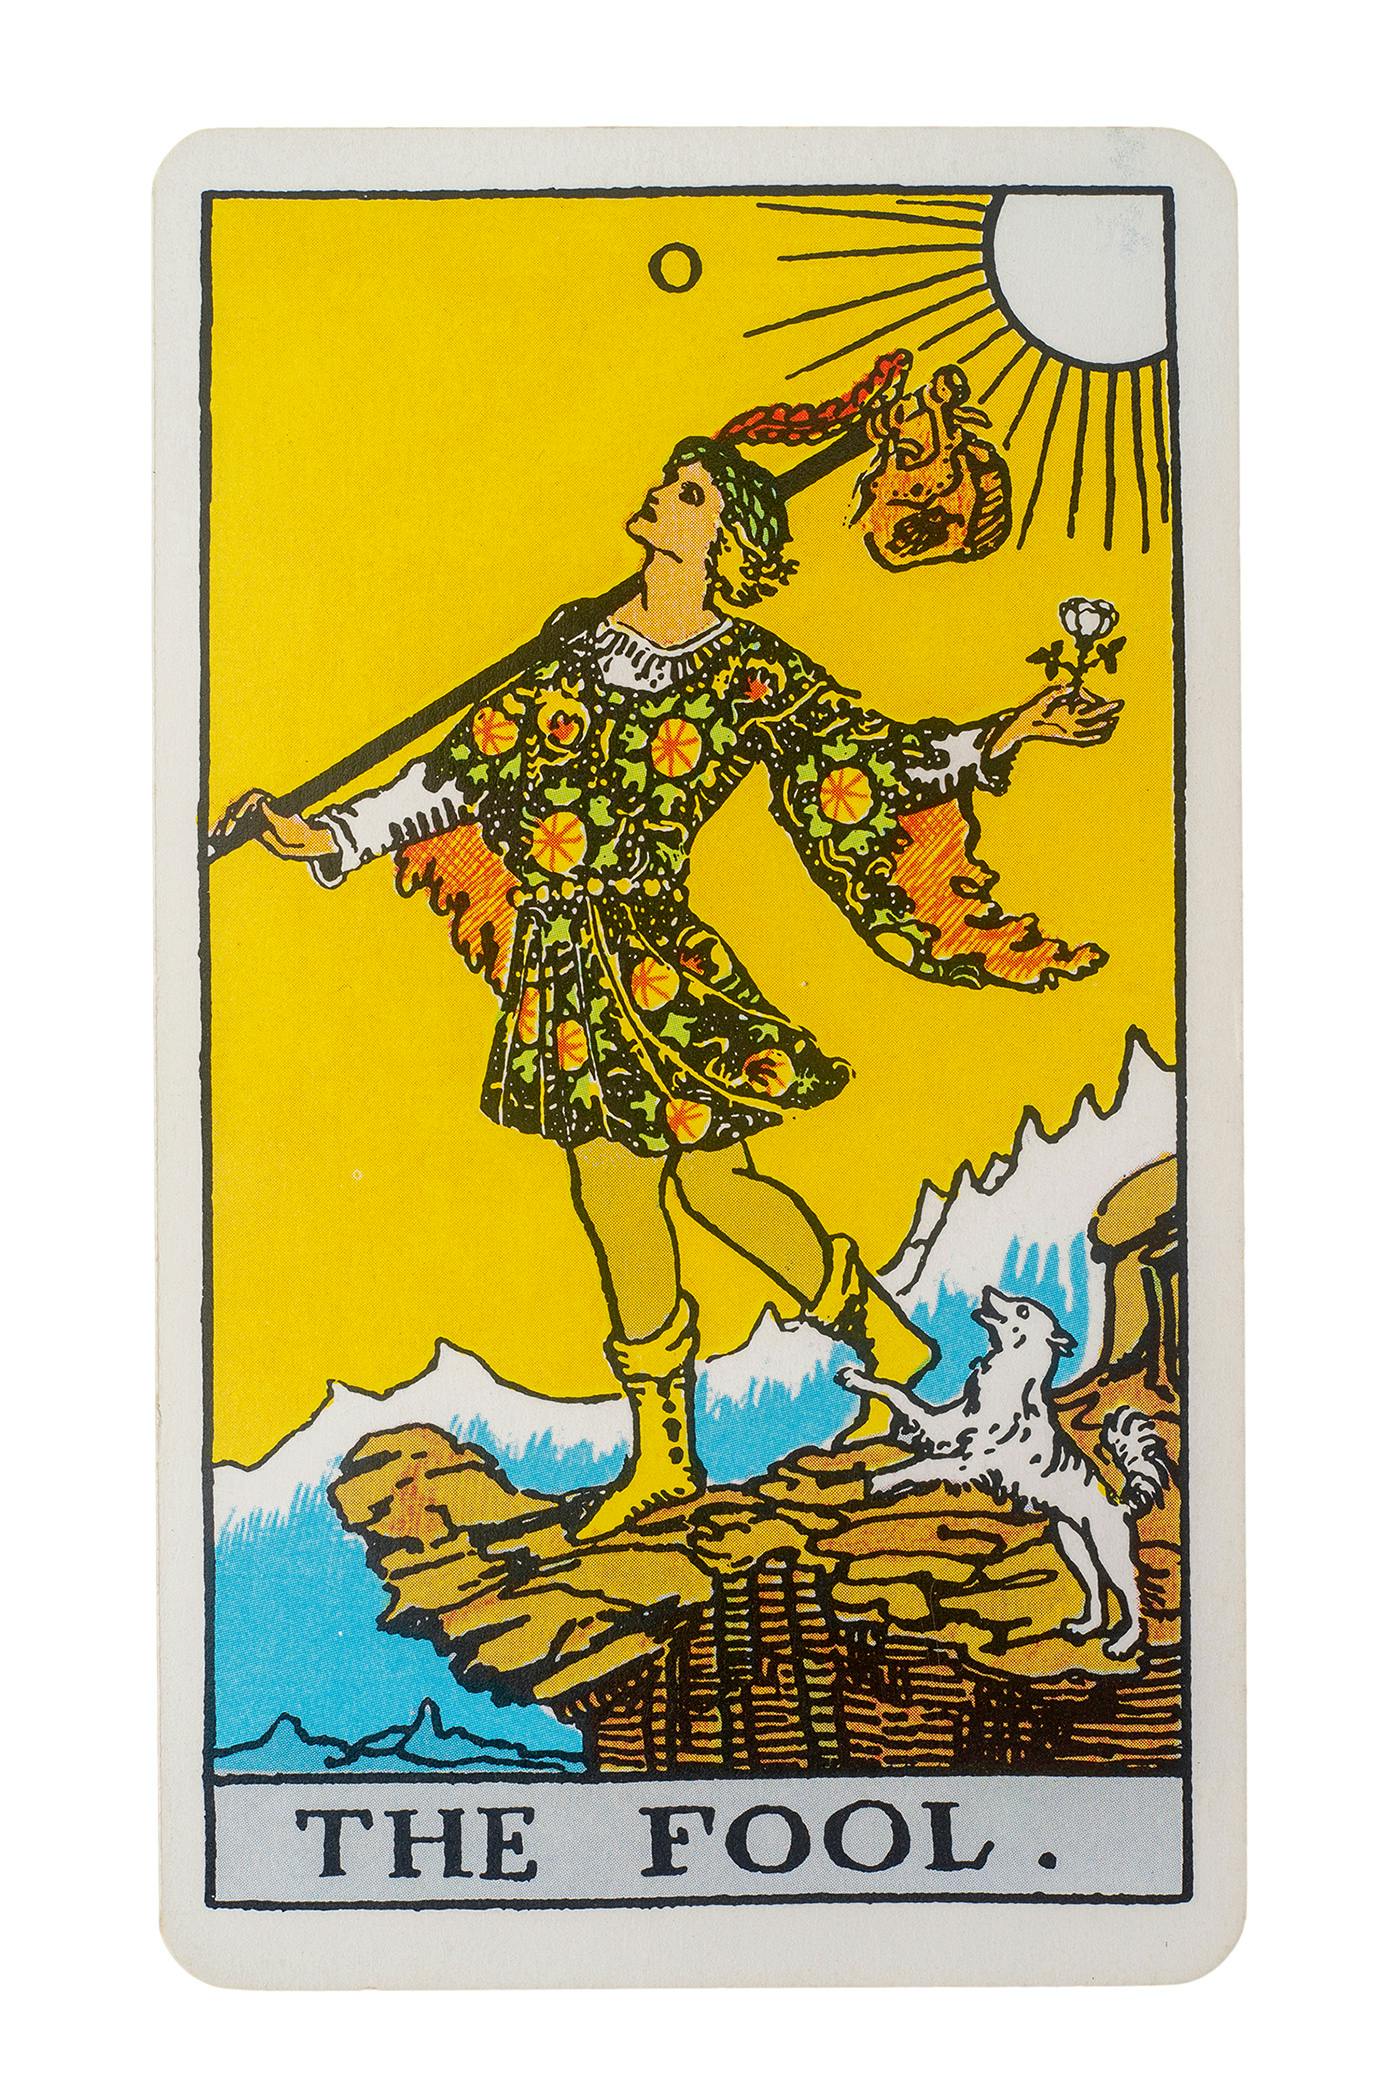 Image of The Fool in the Rider-waite deck. A man standing on the end of a cliff, not paying attention to where he is walking.